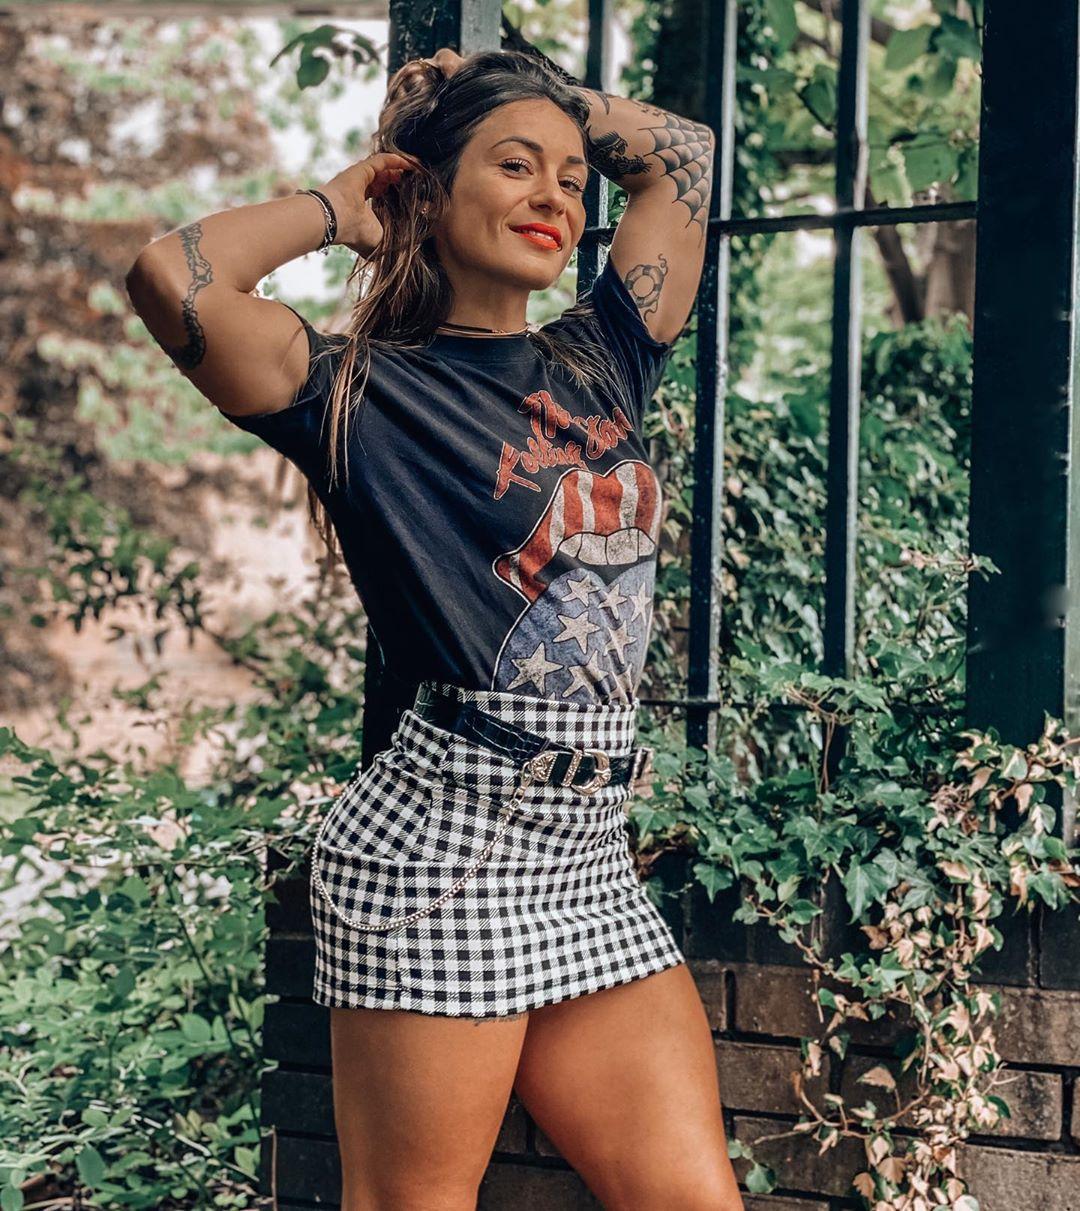 51 Hot Pictures Of Celia Gabbiani Which Make Certain To Grab Your Eye 231